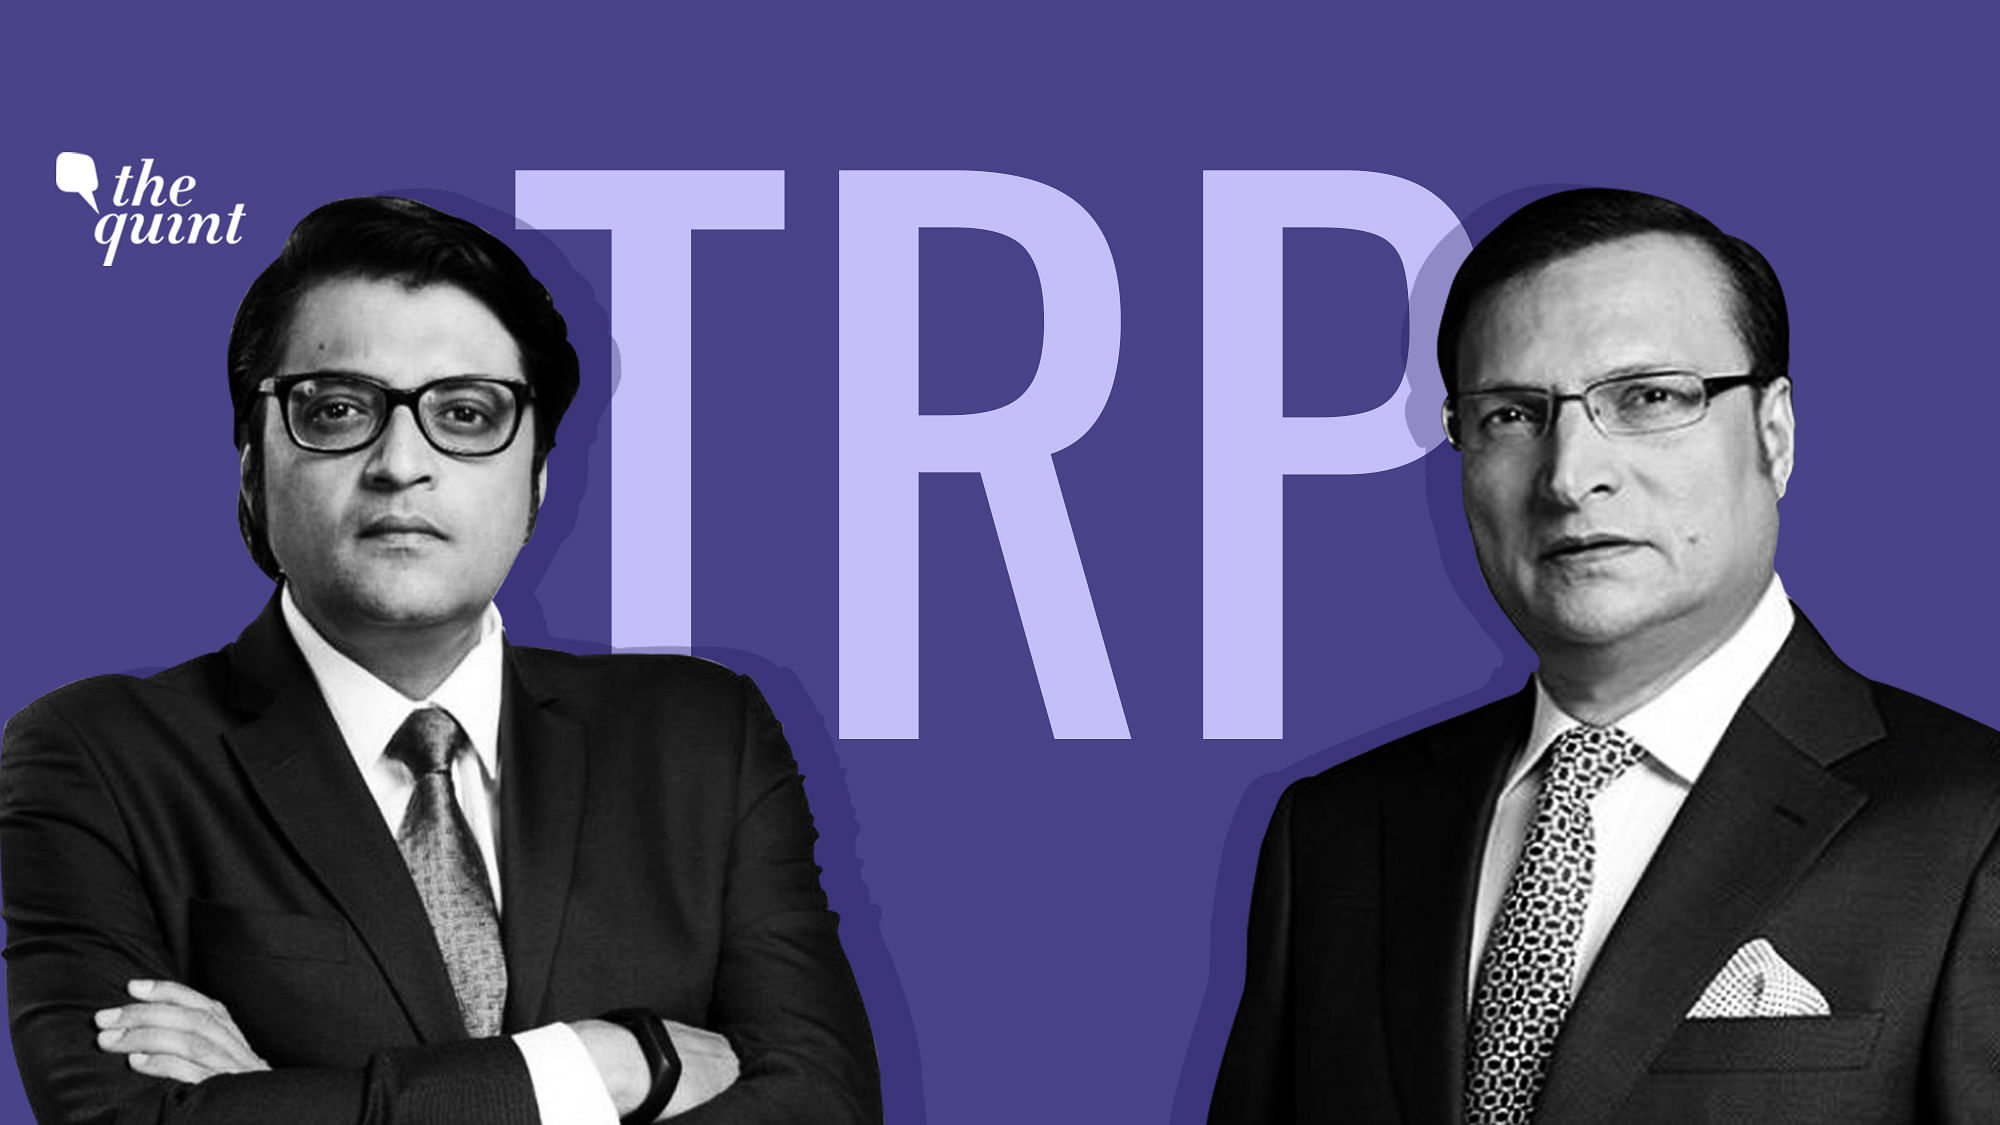 While India TV’s Rajat Sharma leads the National Broadcasters Association (NBA), Arnab Goswami heads the News Broadcasters Federation (NBF). 